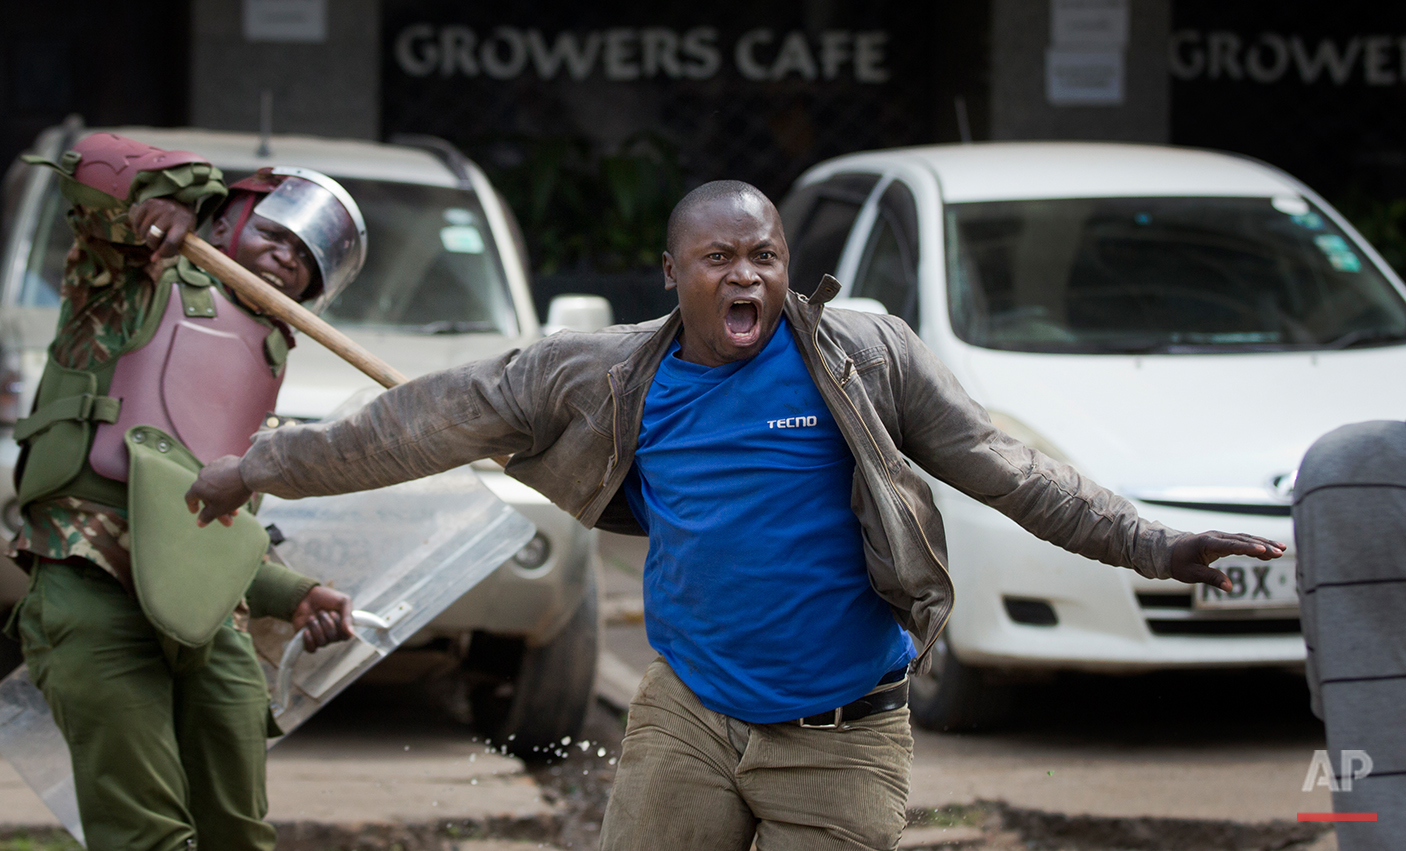  An opposition supporter yells out as he is beaten with a wooden club by riot police while trying to flee, during a protest in downtown Nairobi, Kenya Monday, May 16, 2016. Kenyan police have tear-gassed and beaten opposition supporters during a prot